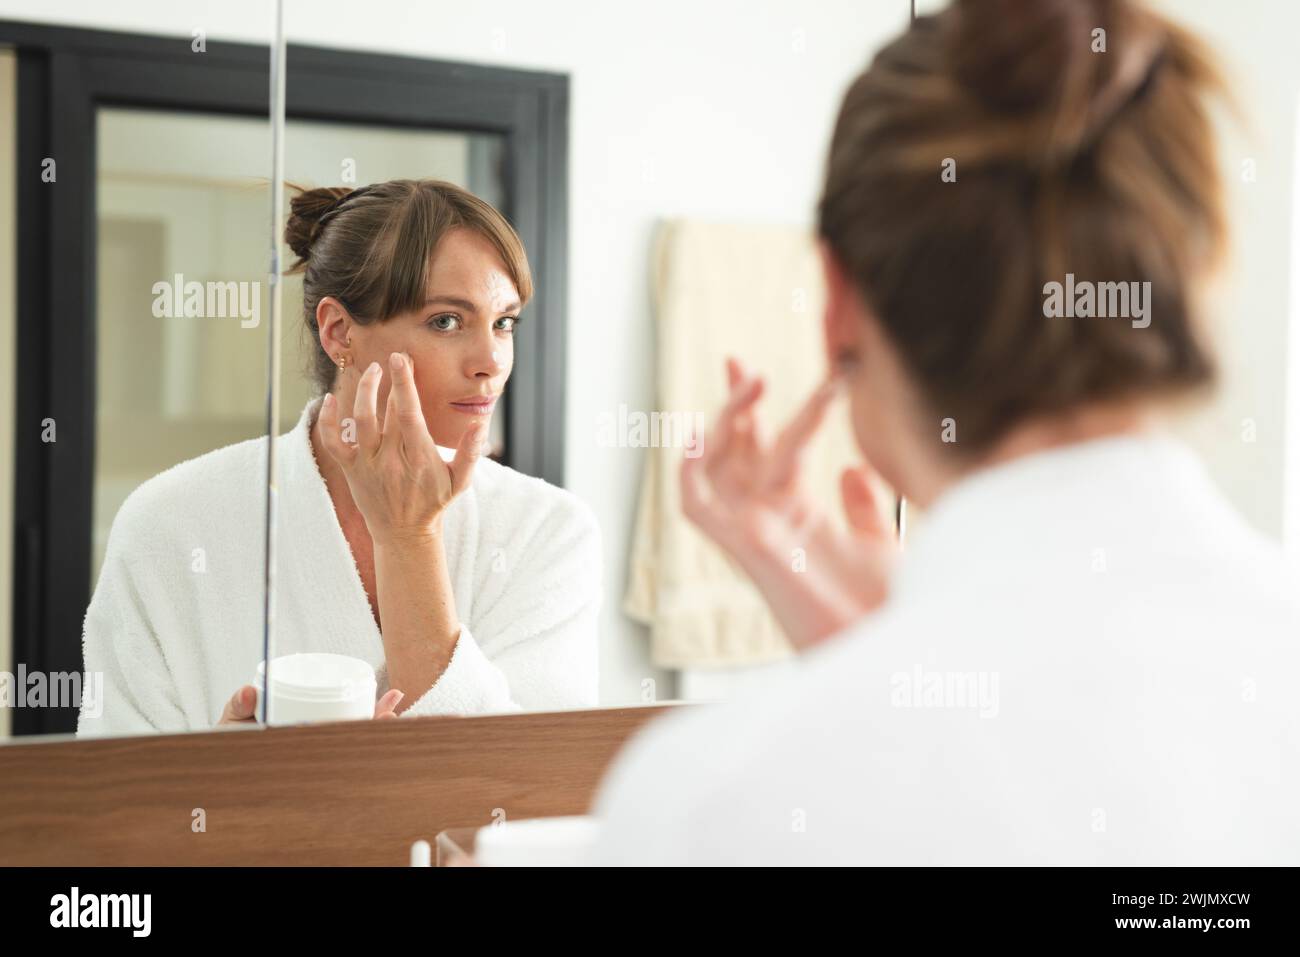 Caucasian woman applies cream to her face at home Stock Photo